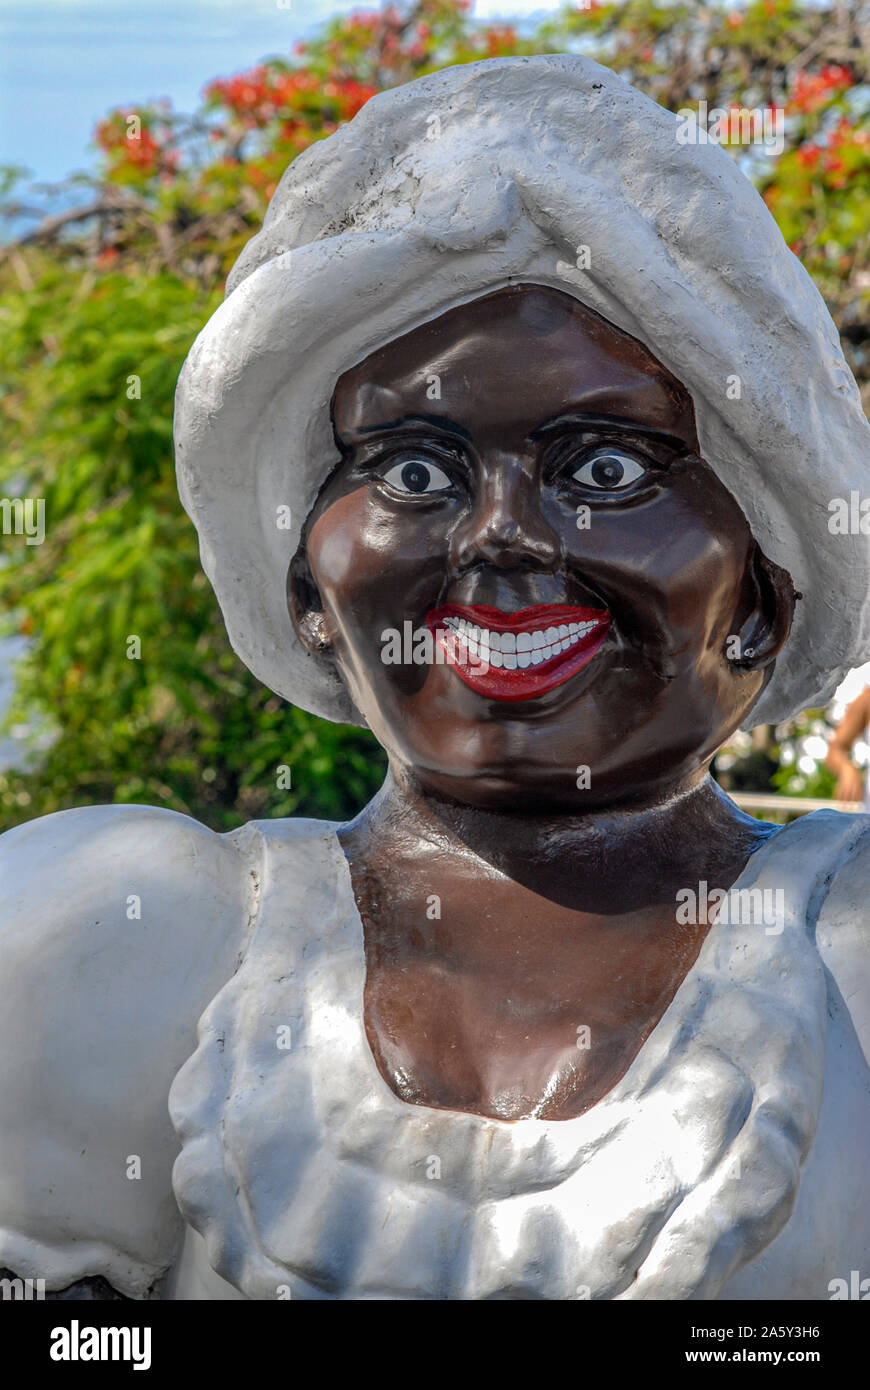 Huge figure of a Bahian woman in traditional clothes in the Pelourinho old town of Salvador de Bahia, Brazil Stock Photo